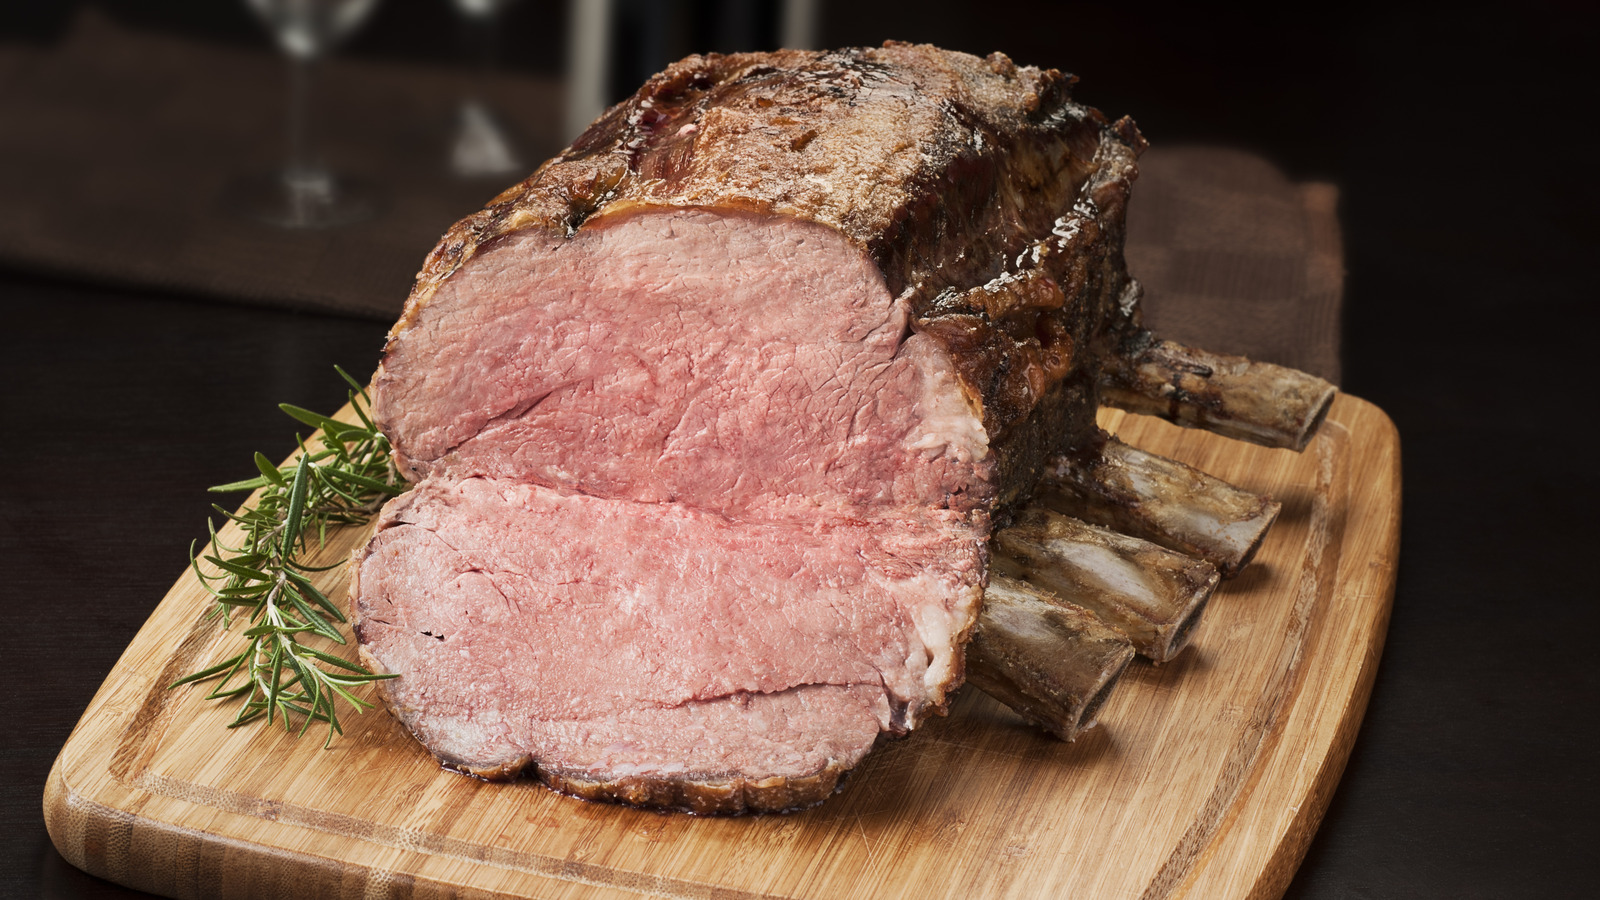 https://www.tastingtable.com/img/gallery/how-to-make-prime-rib-at-high-altitude/l-intro-1692903497.jpg